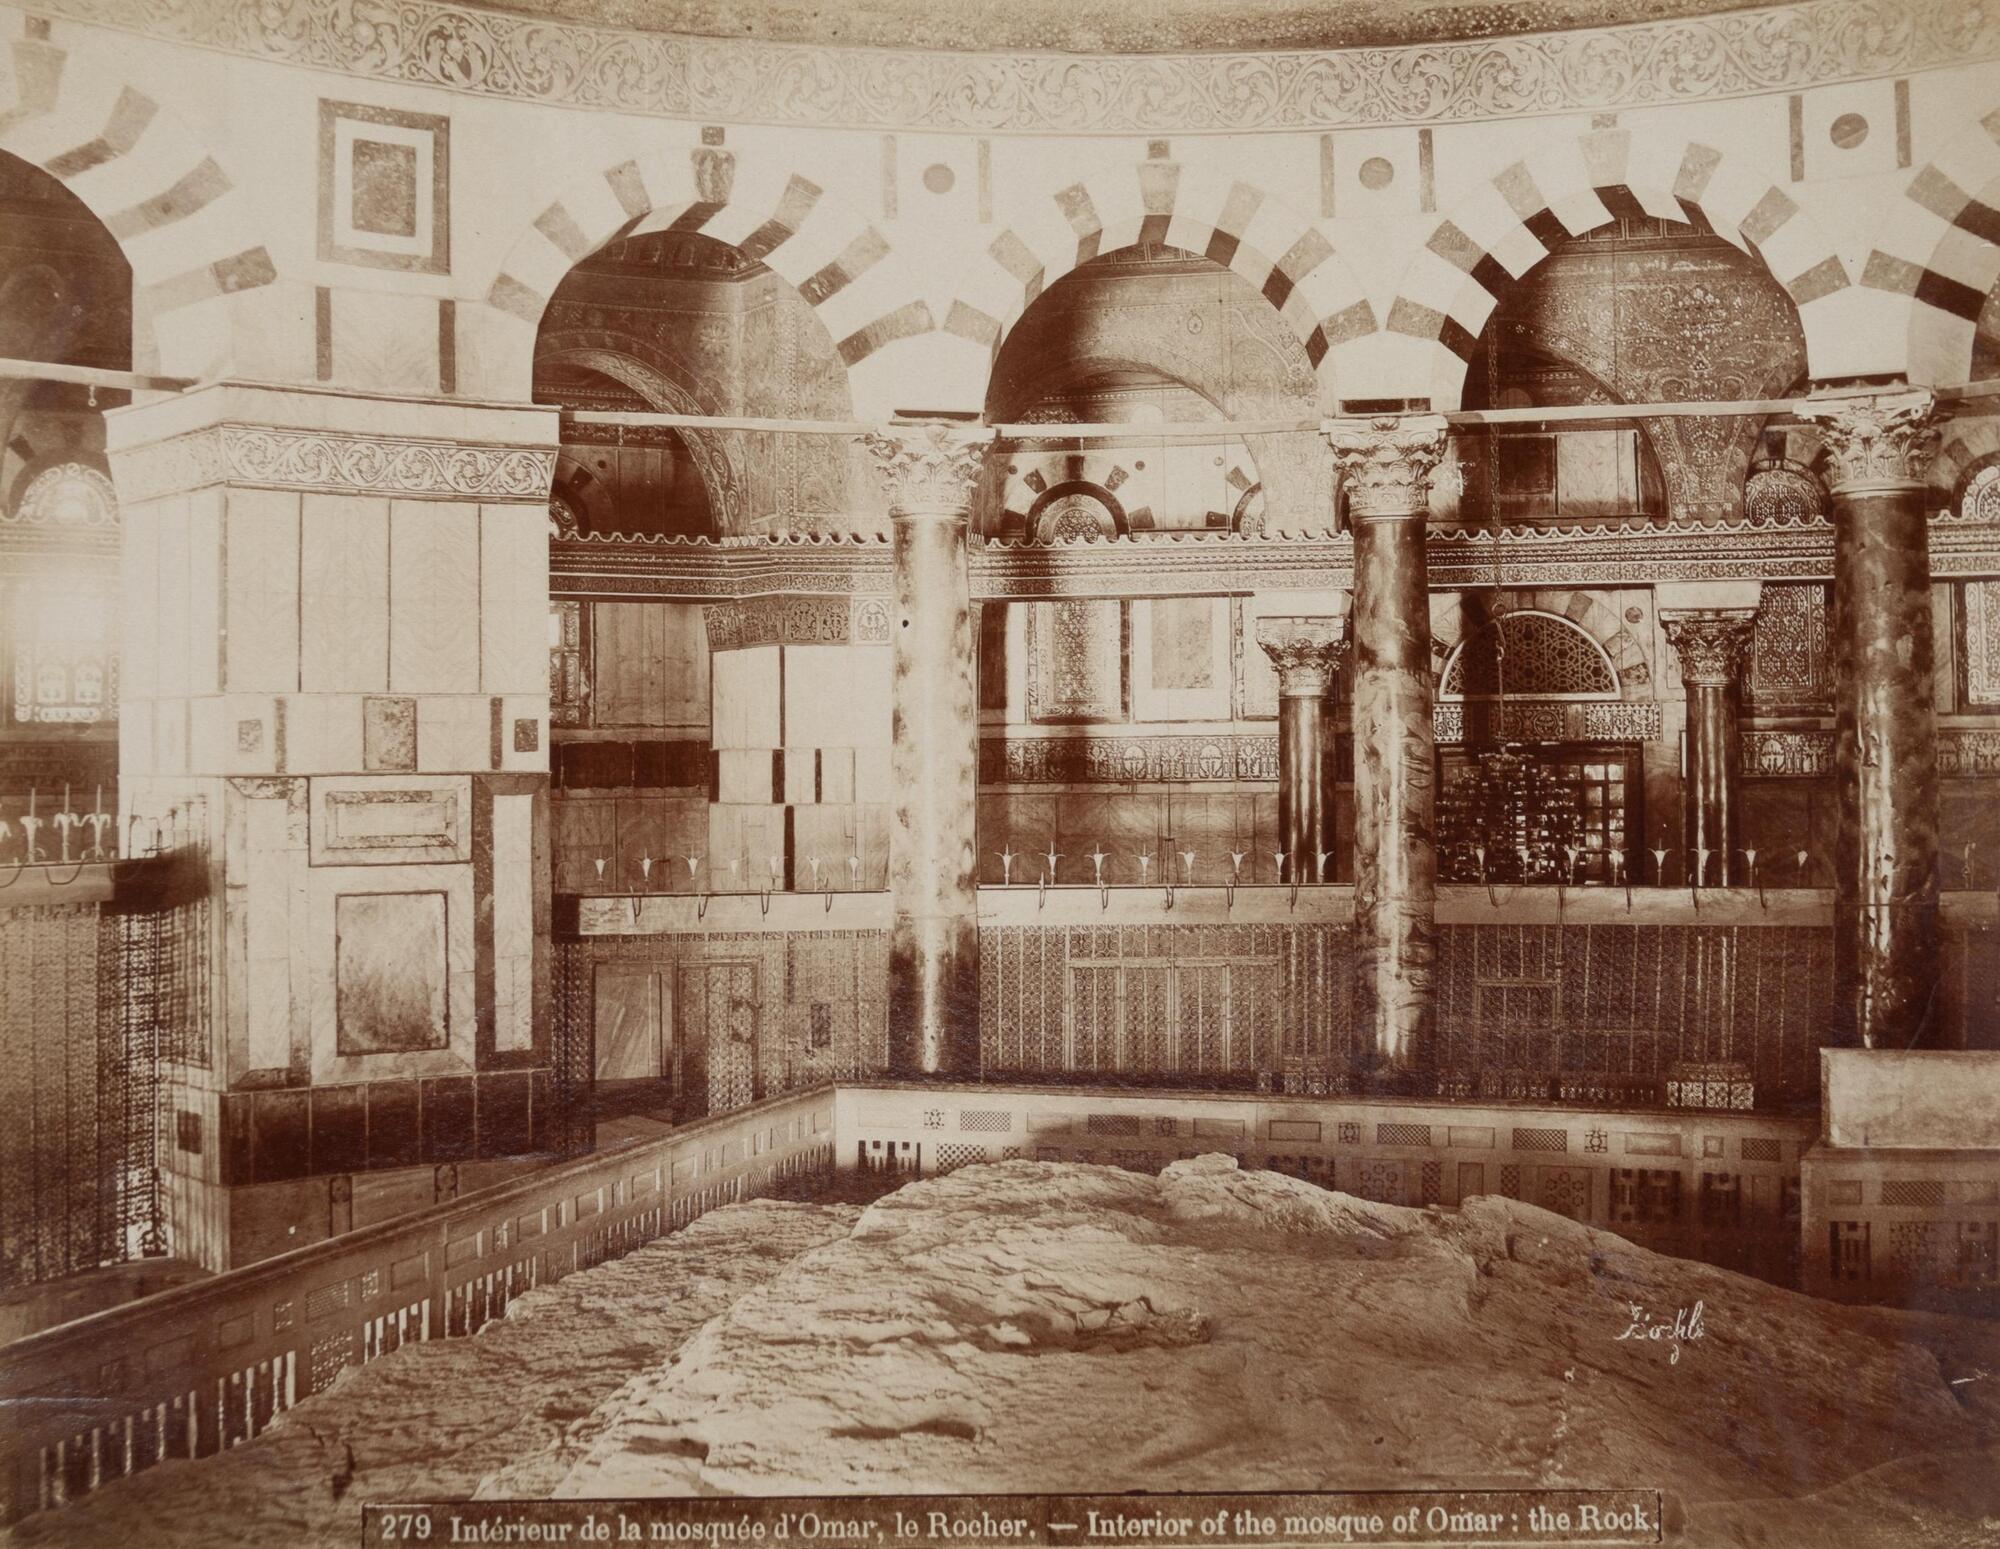 Interior view of a chamber surrounded by a polygonal arcade. The lower register of the photograph shows a large, roughly hewn stone slab.